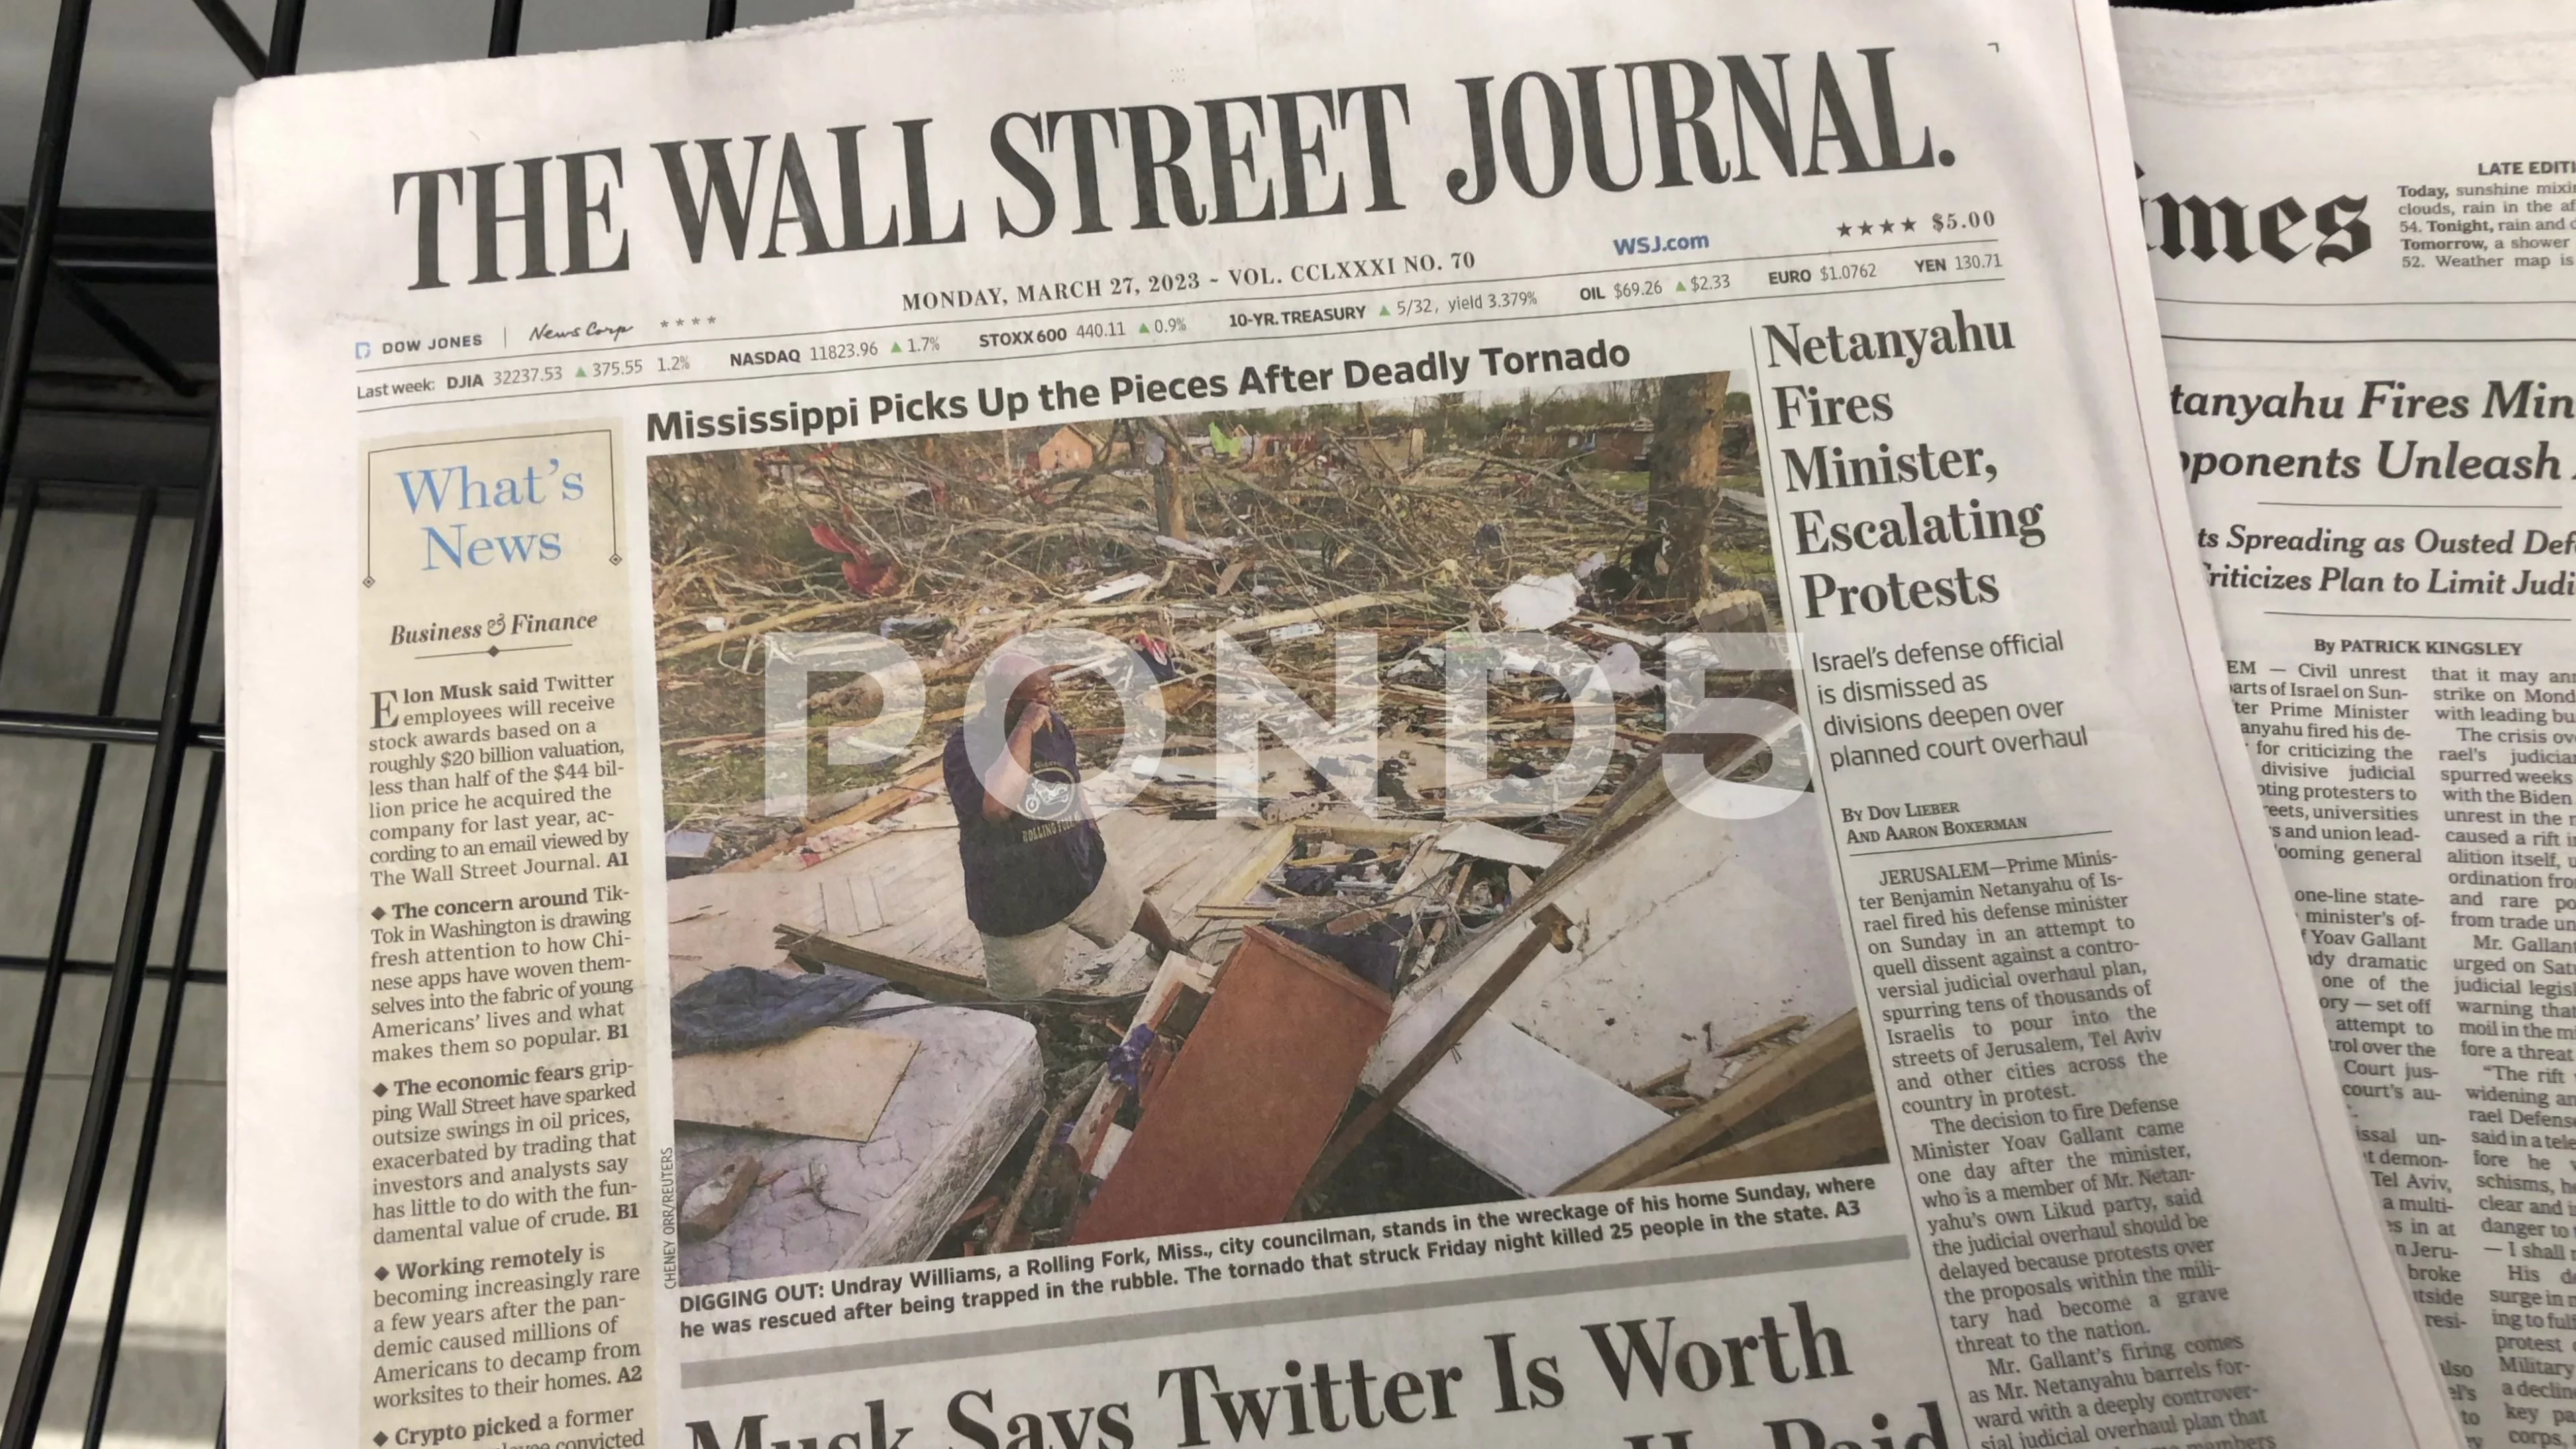 How do I find historical articles from the Wall Street Journal